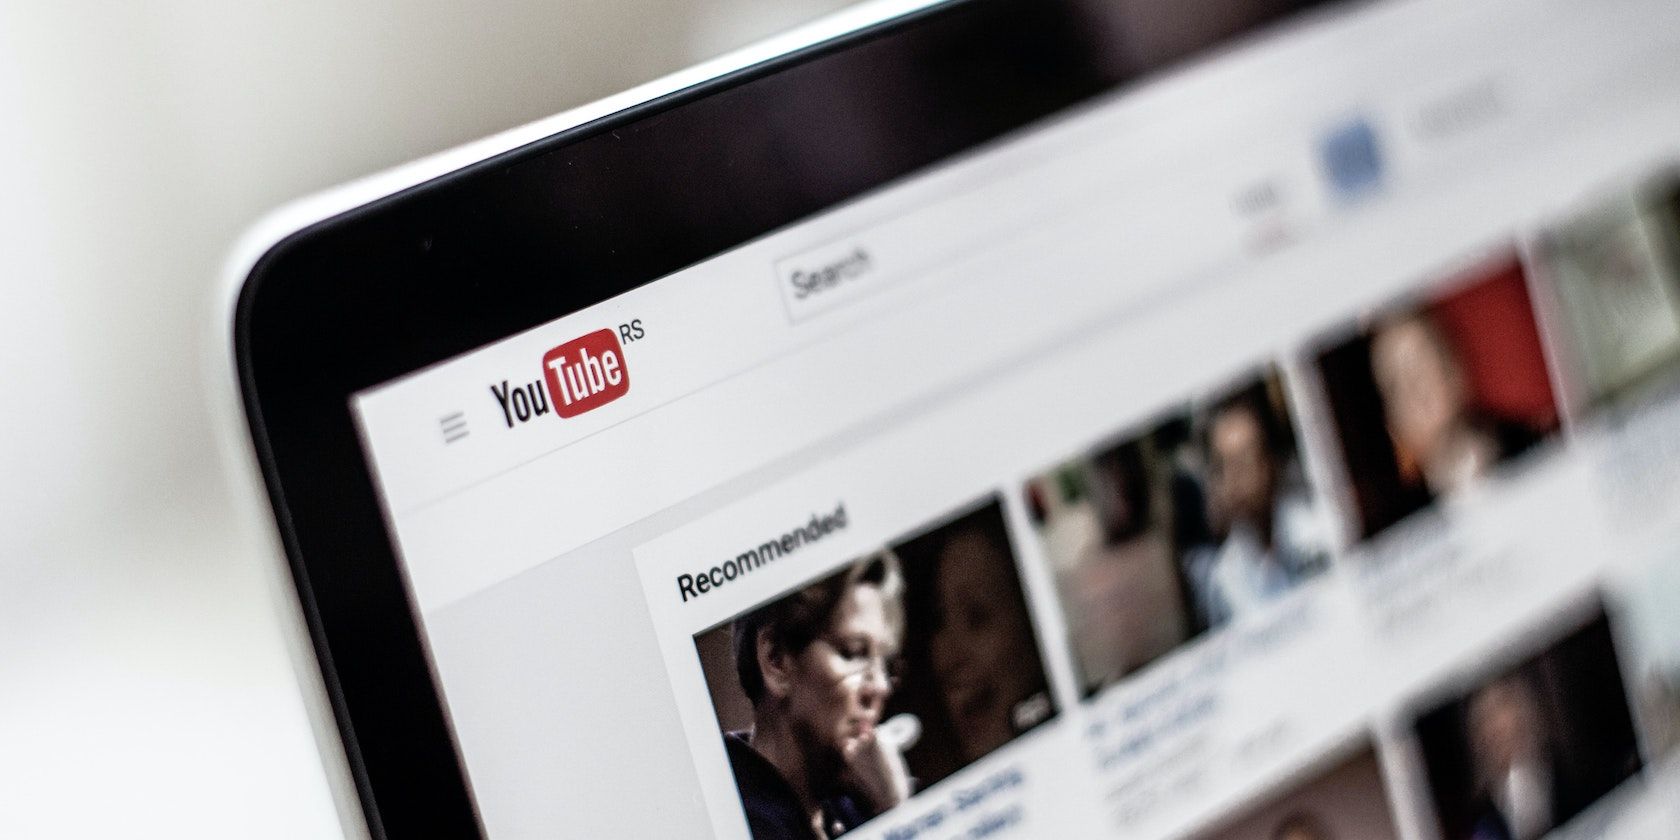 A photograph of a laptop screen displaying YouTube